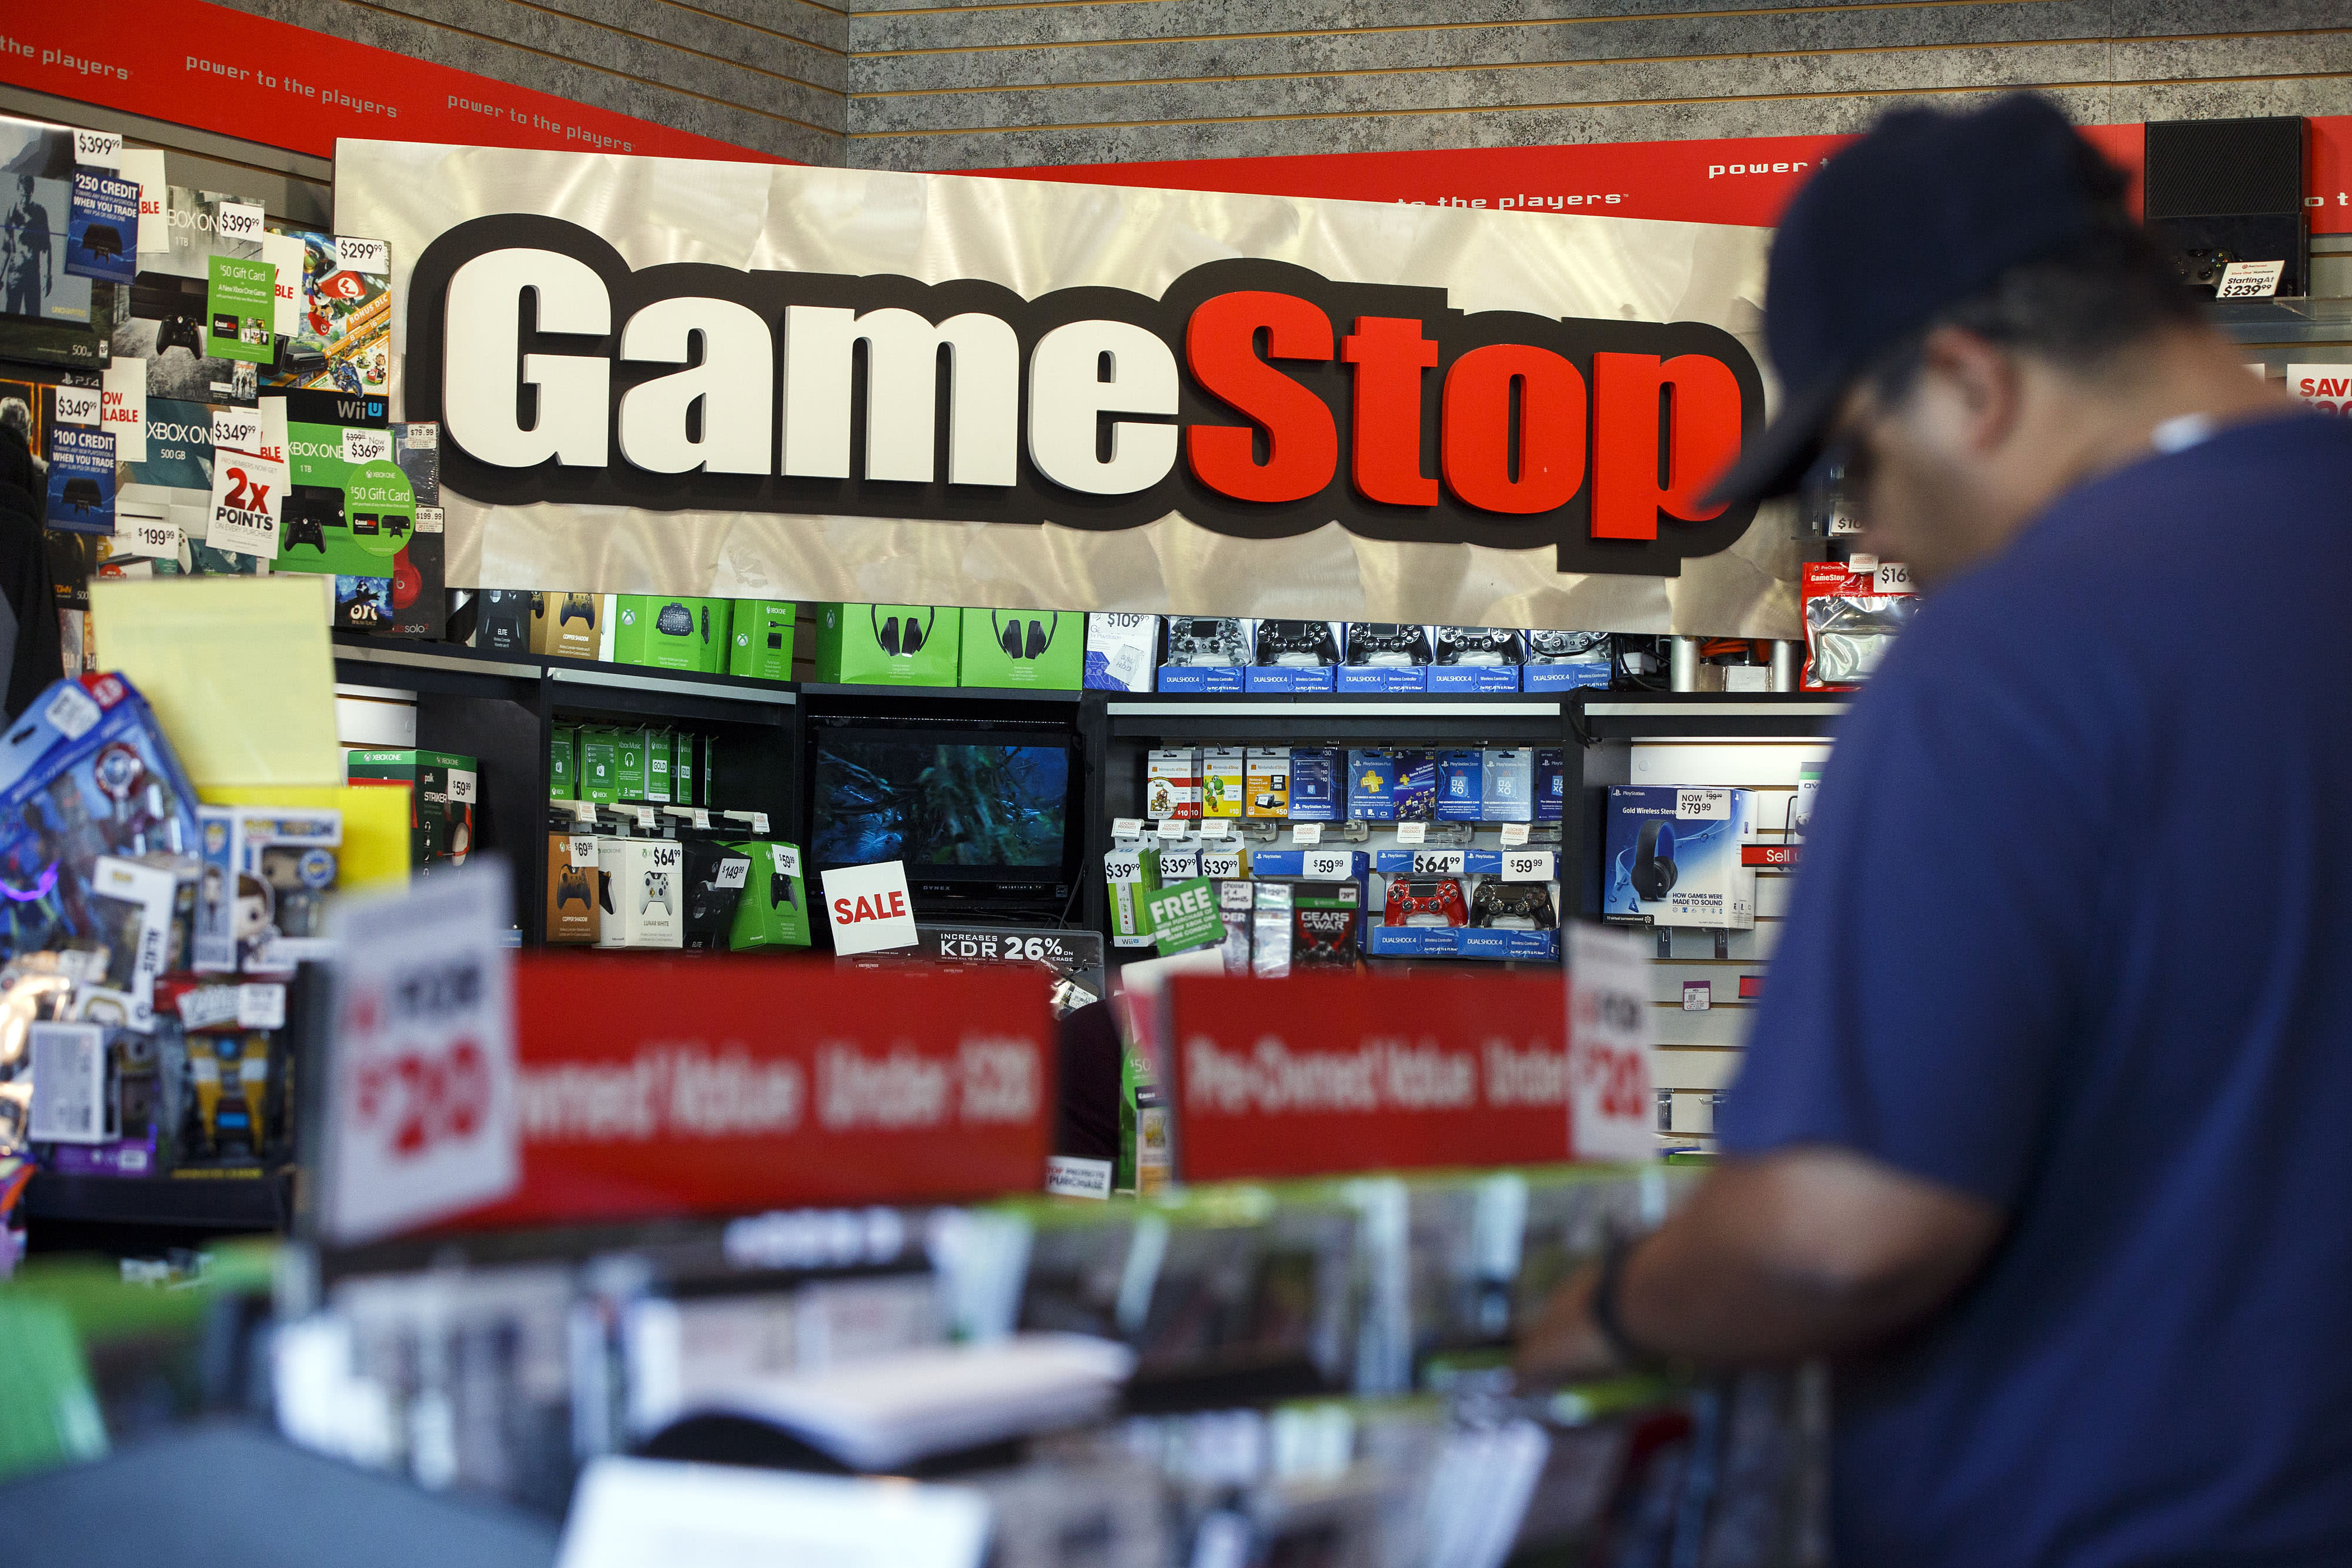 GameStop to close up to 200 stores by year's end